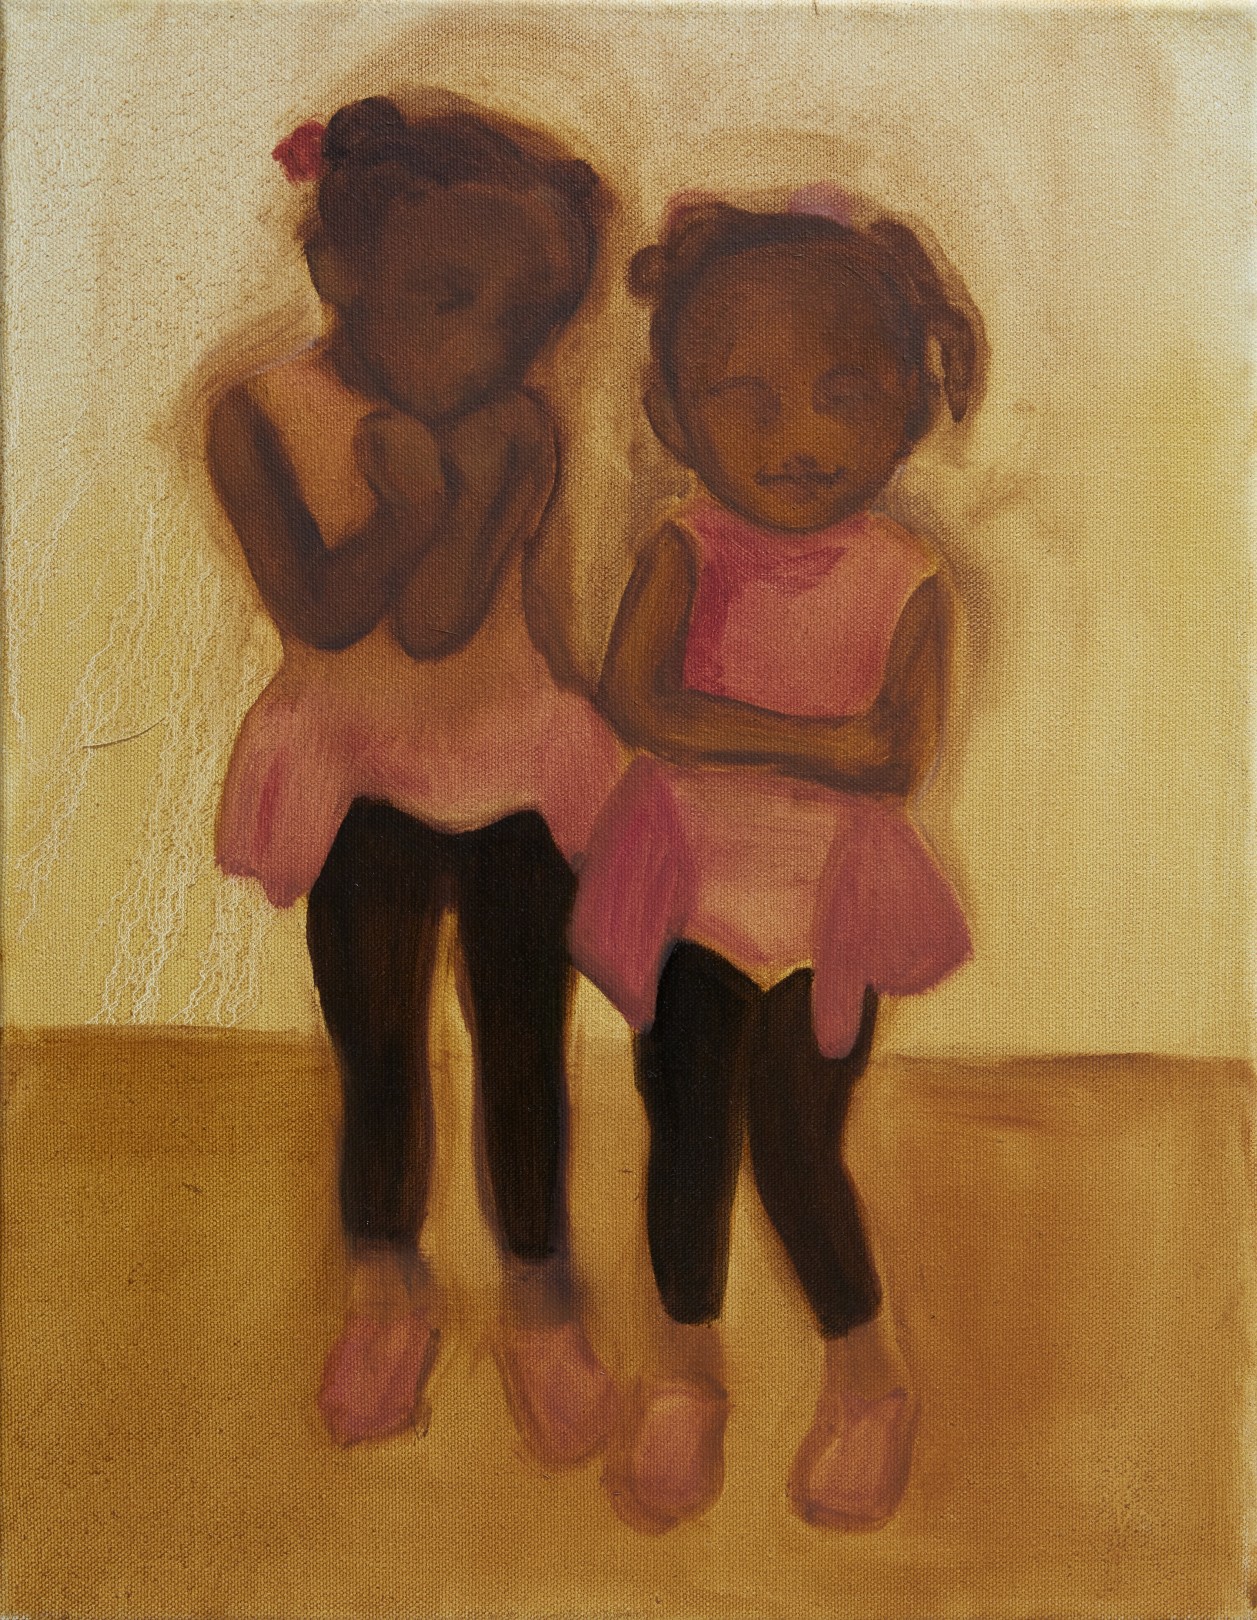 Dancing (in pink), 2021 Oil on canvas 46 x 36 cm. / 18 x 14 in.